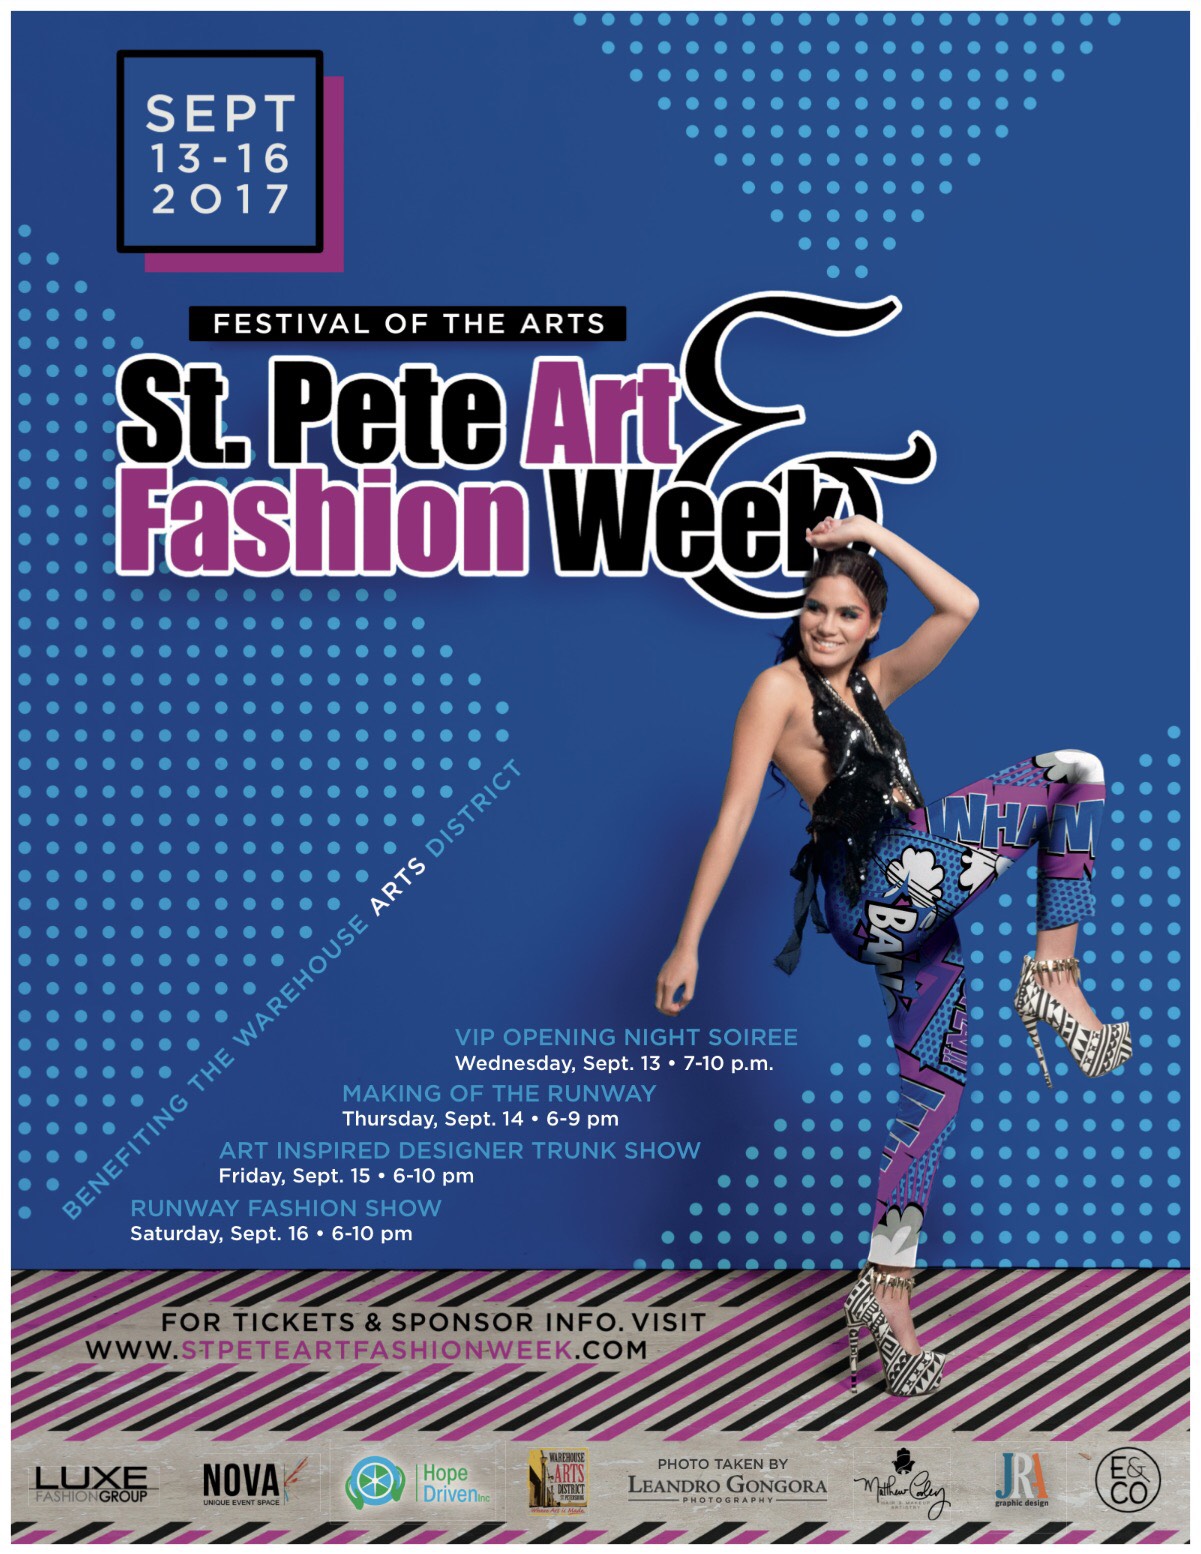 Client News: St. Pete Art & Fashion Week Celebrates 7th Year with Pop Art